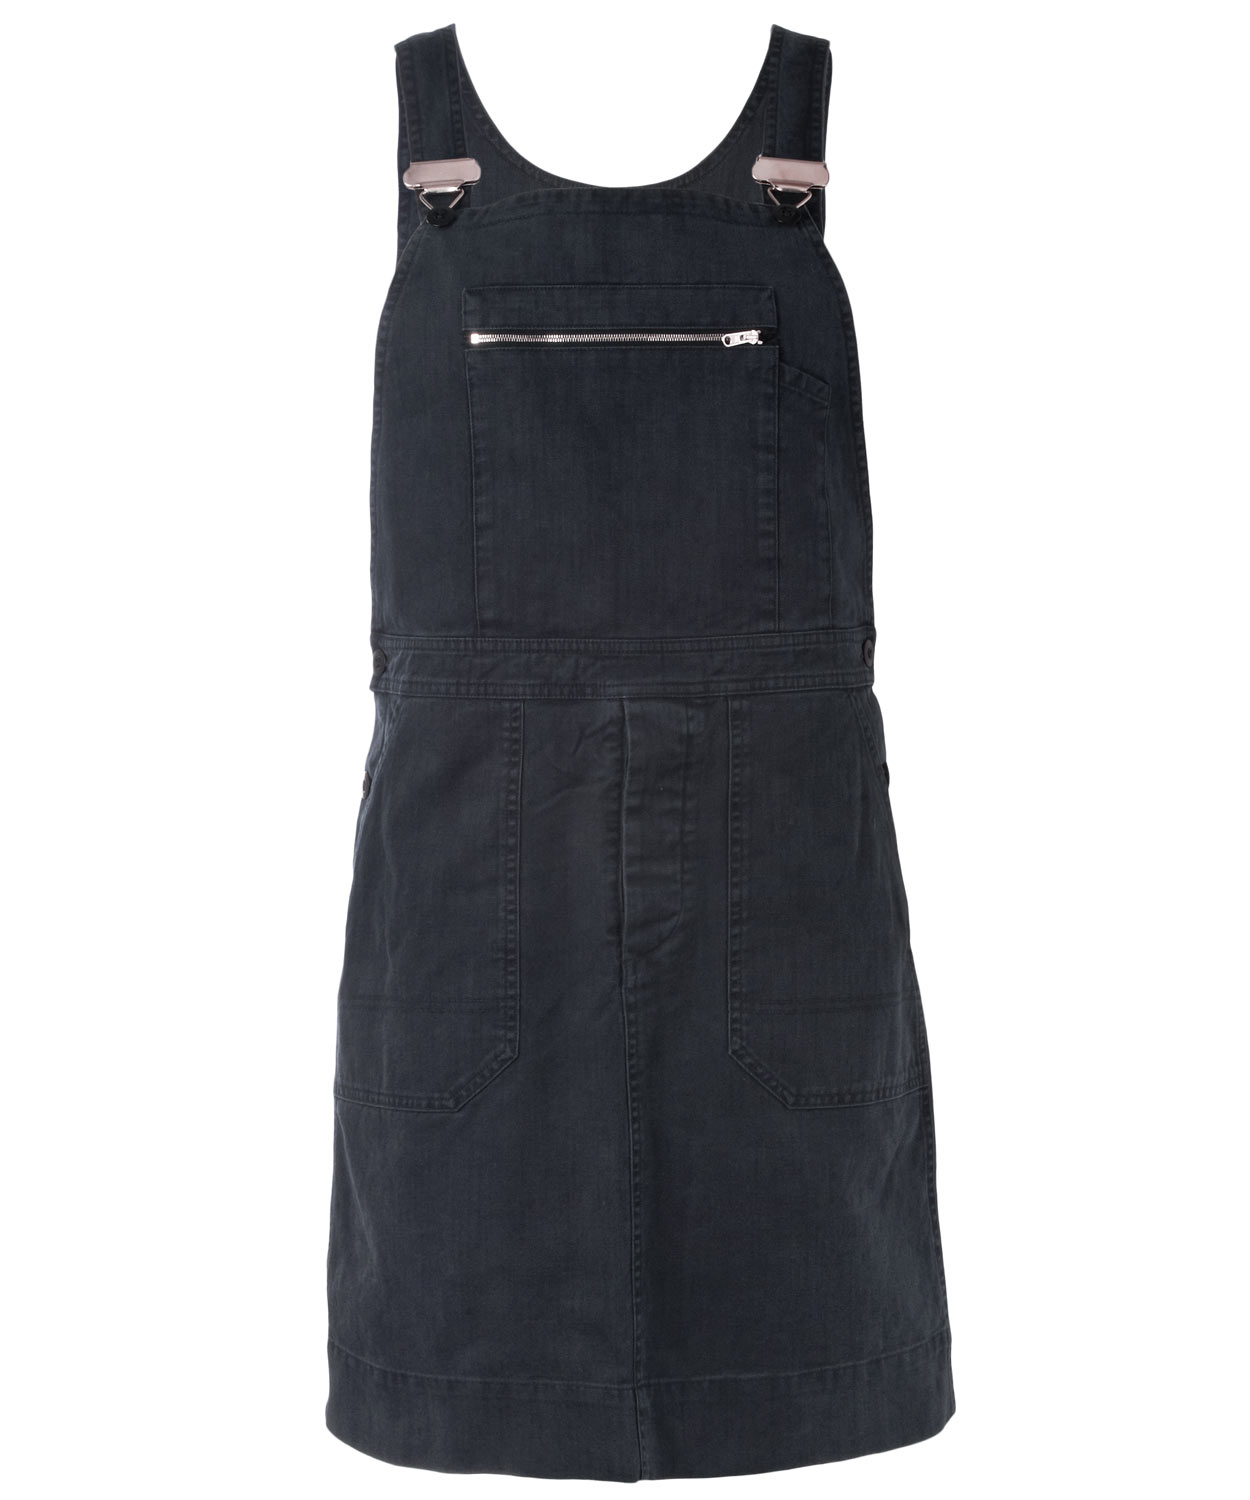 Mhl By Margaret Howell Indigo Cotton Twill Dungaree Dress in Black ...